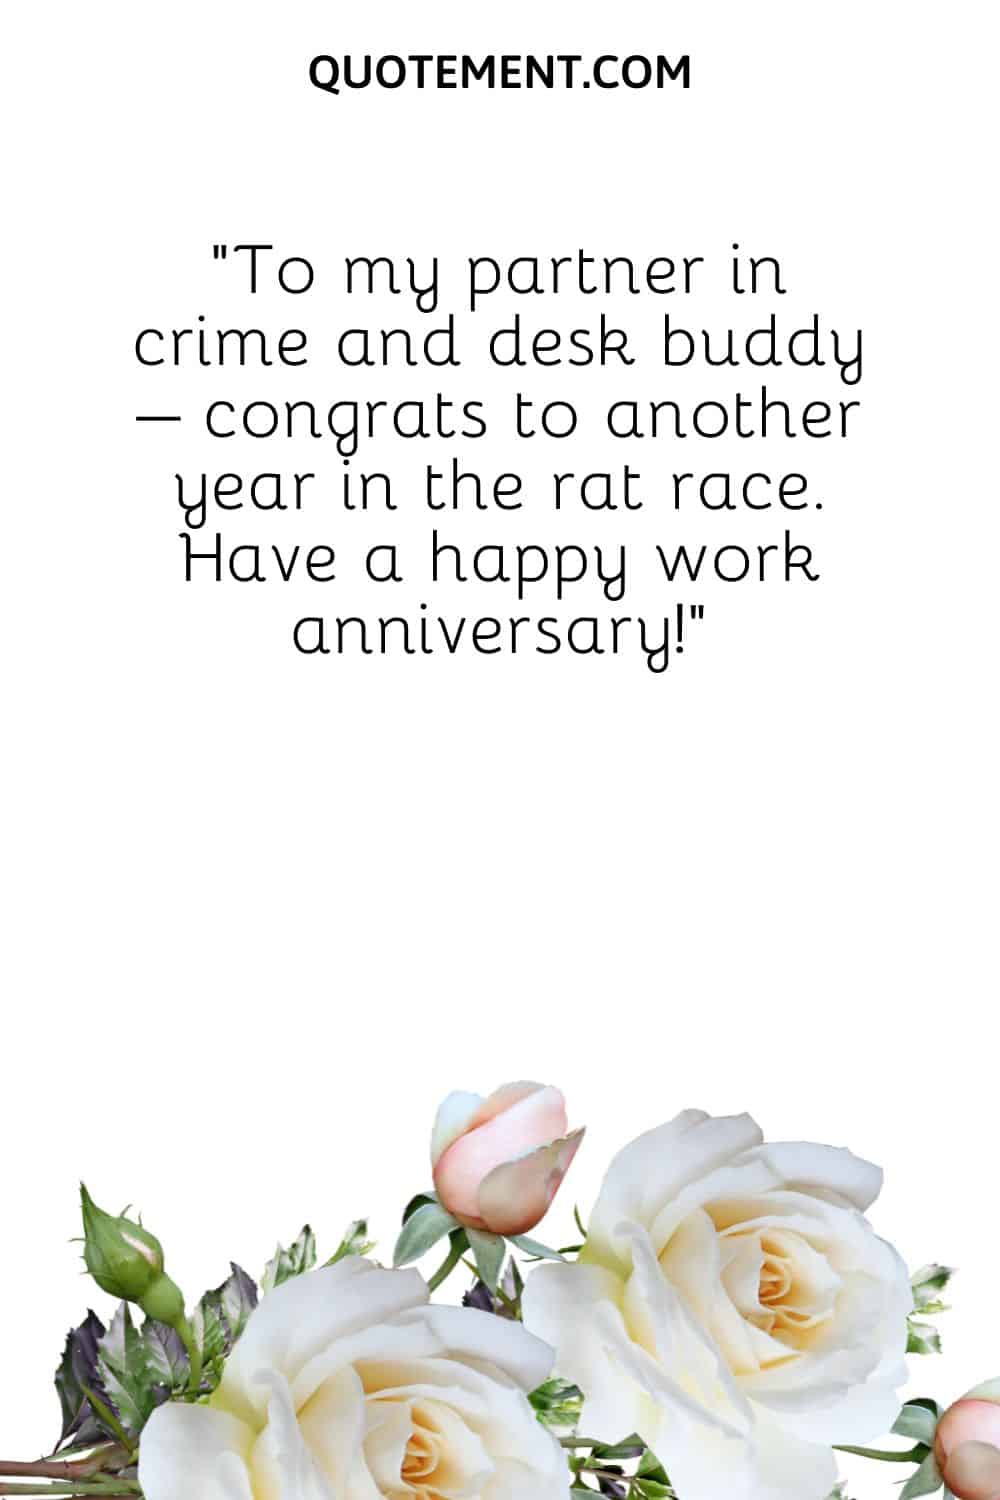 “To my partner in crime and desk buddy – congrats to another year in the rat race. Have a happy work anniversary!”